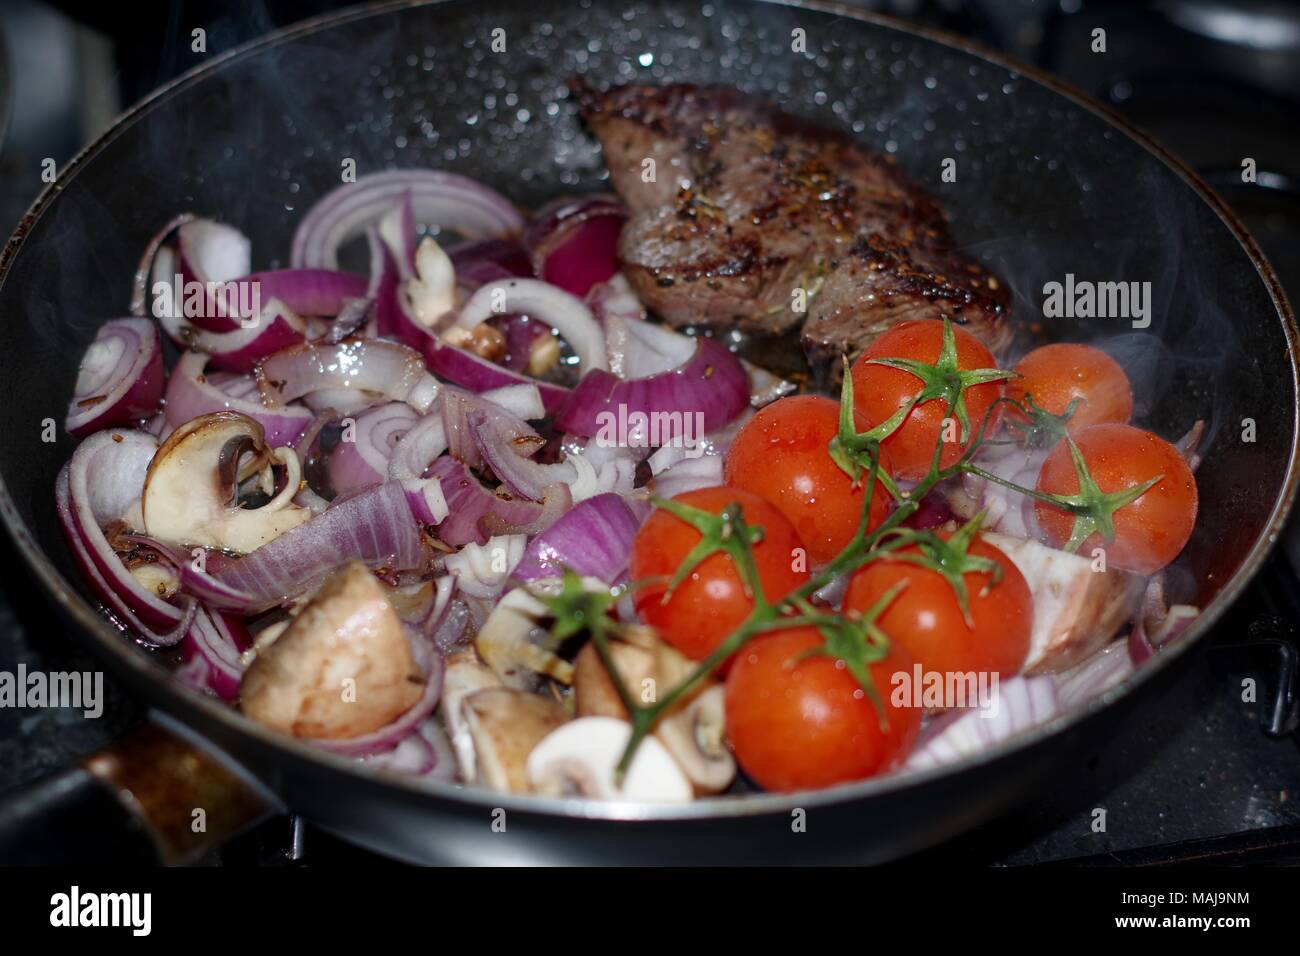 Steak Dinner Cooking in a Frying Pan, with Cheery Tomatoes, Red Onions and Mushrooms. Clean Eating and Home Cooking, UK. Stock Photo